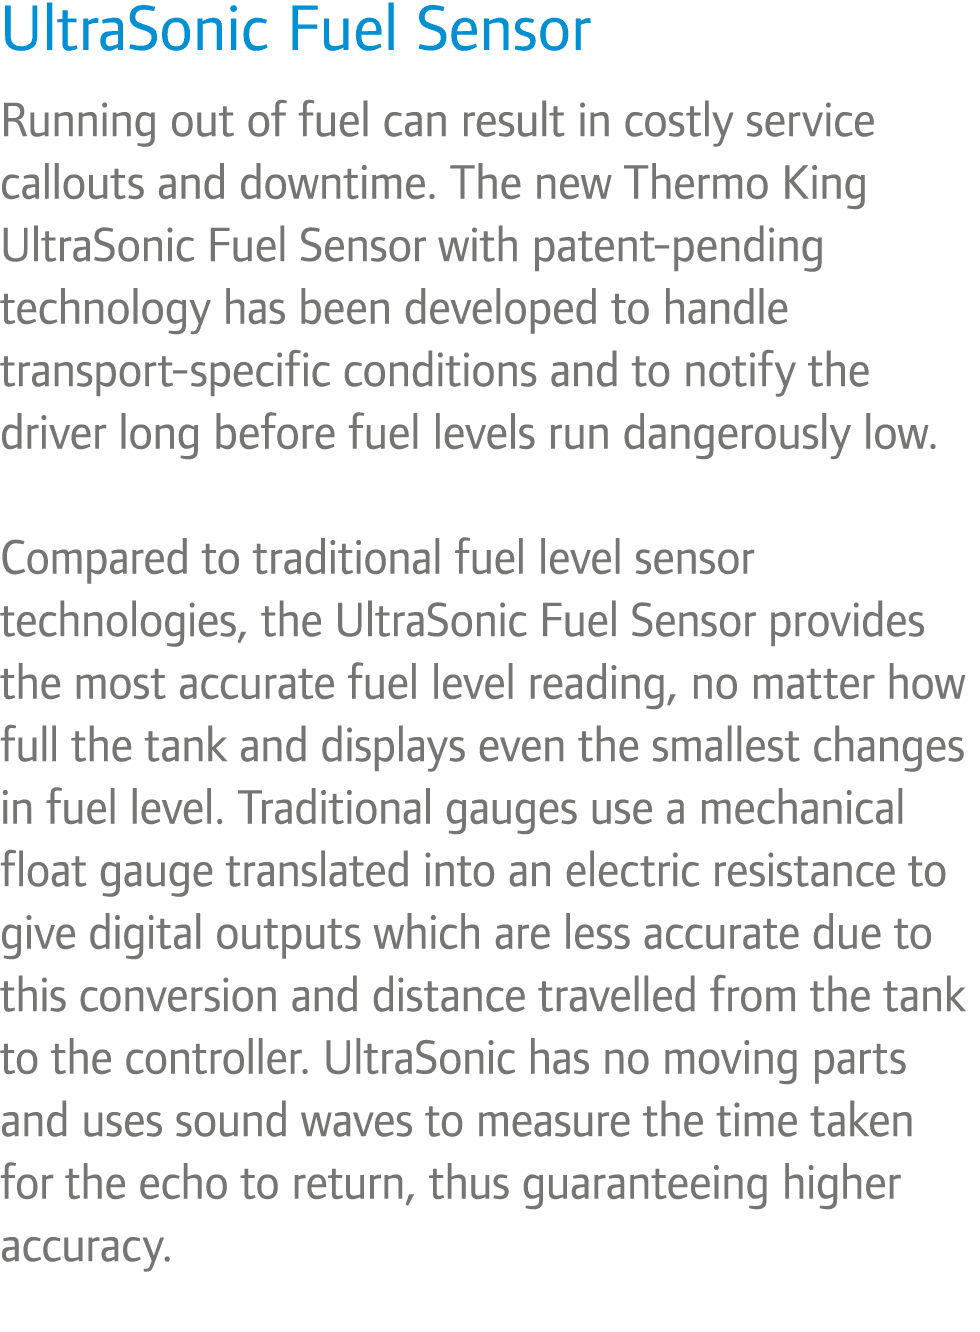 UltraSonic Fuel Sensor Running out of fuel can result in costly service callouts and downtime. The new Thermo King Ul...